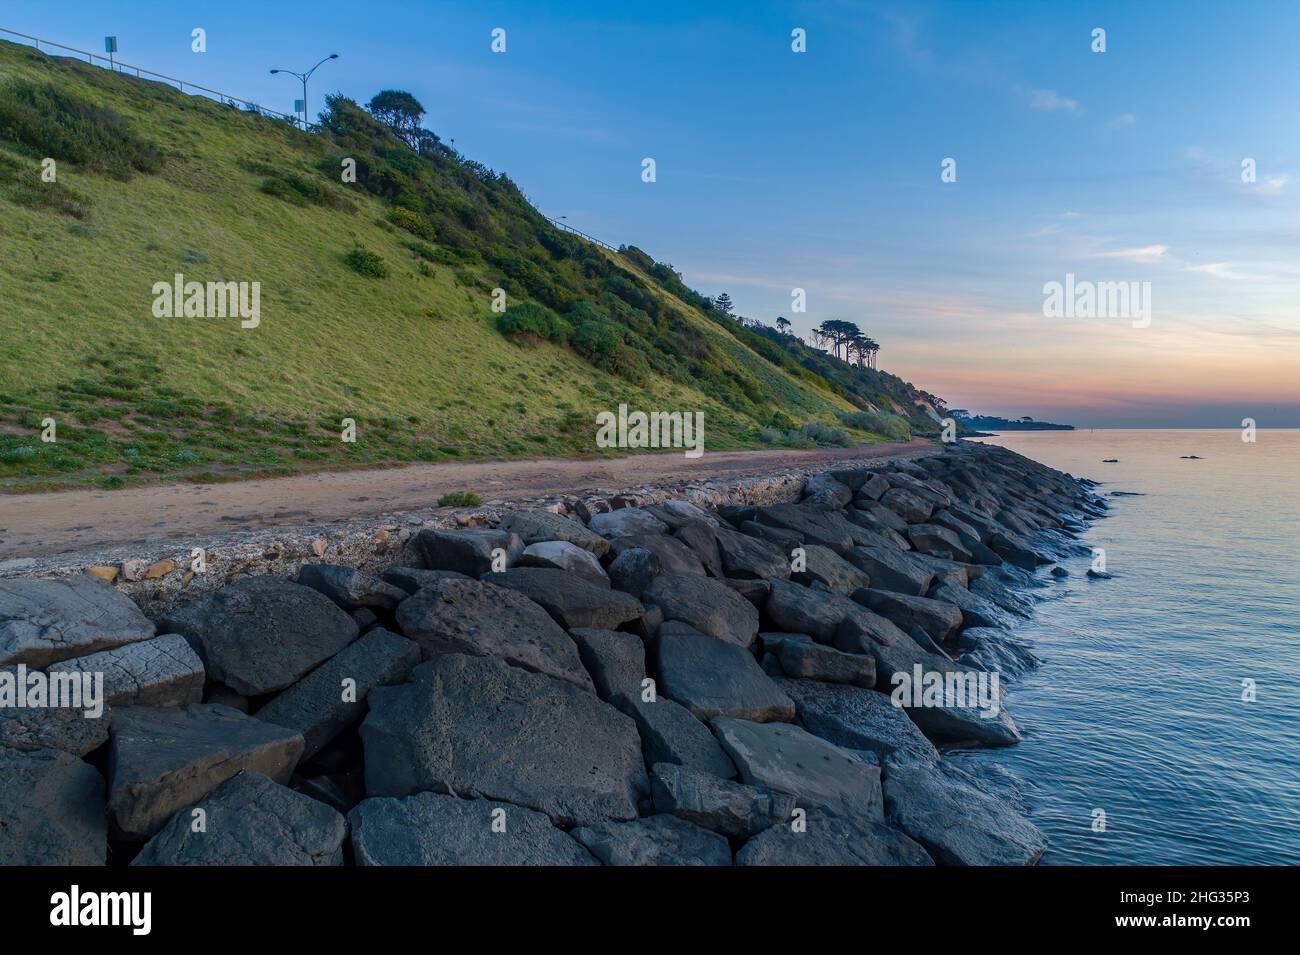 Breakwater and grassy hill with trees at sunset in Frankston, Australia Stock Photo